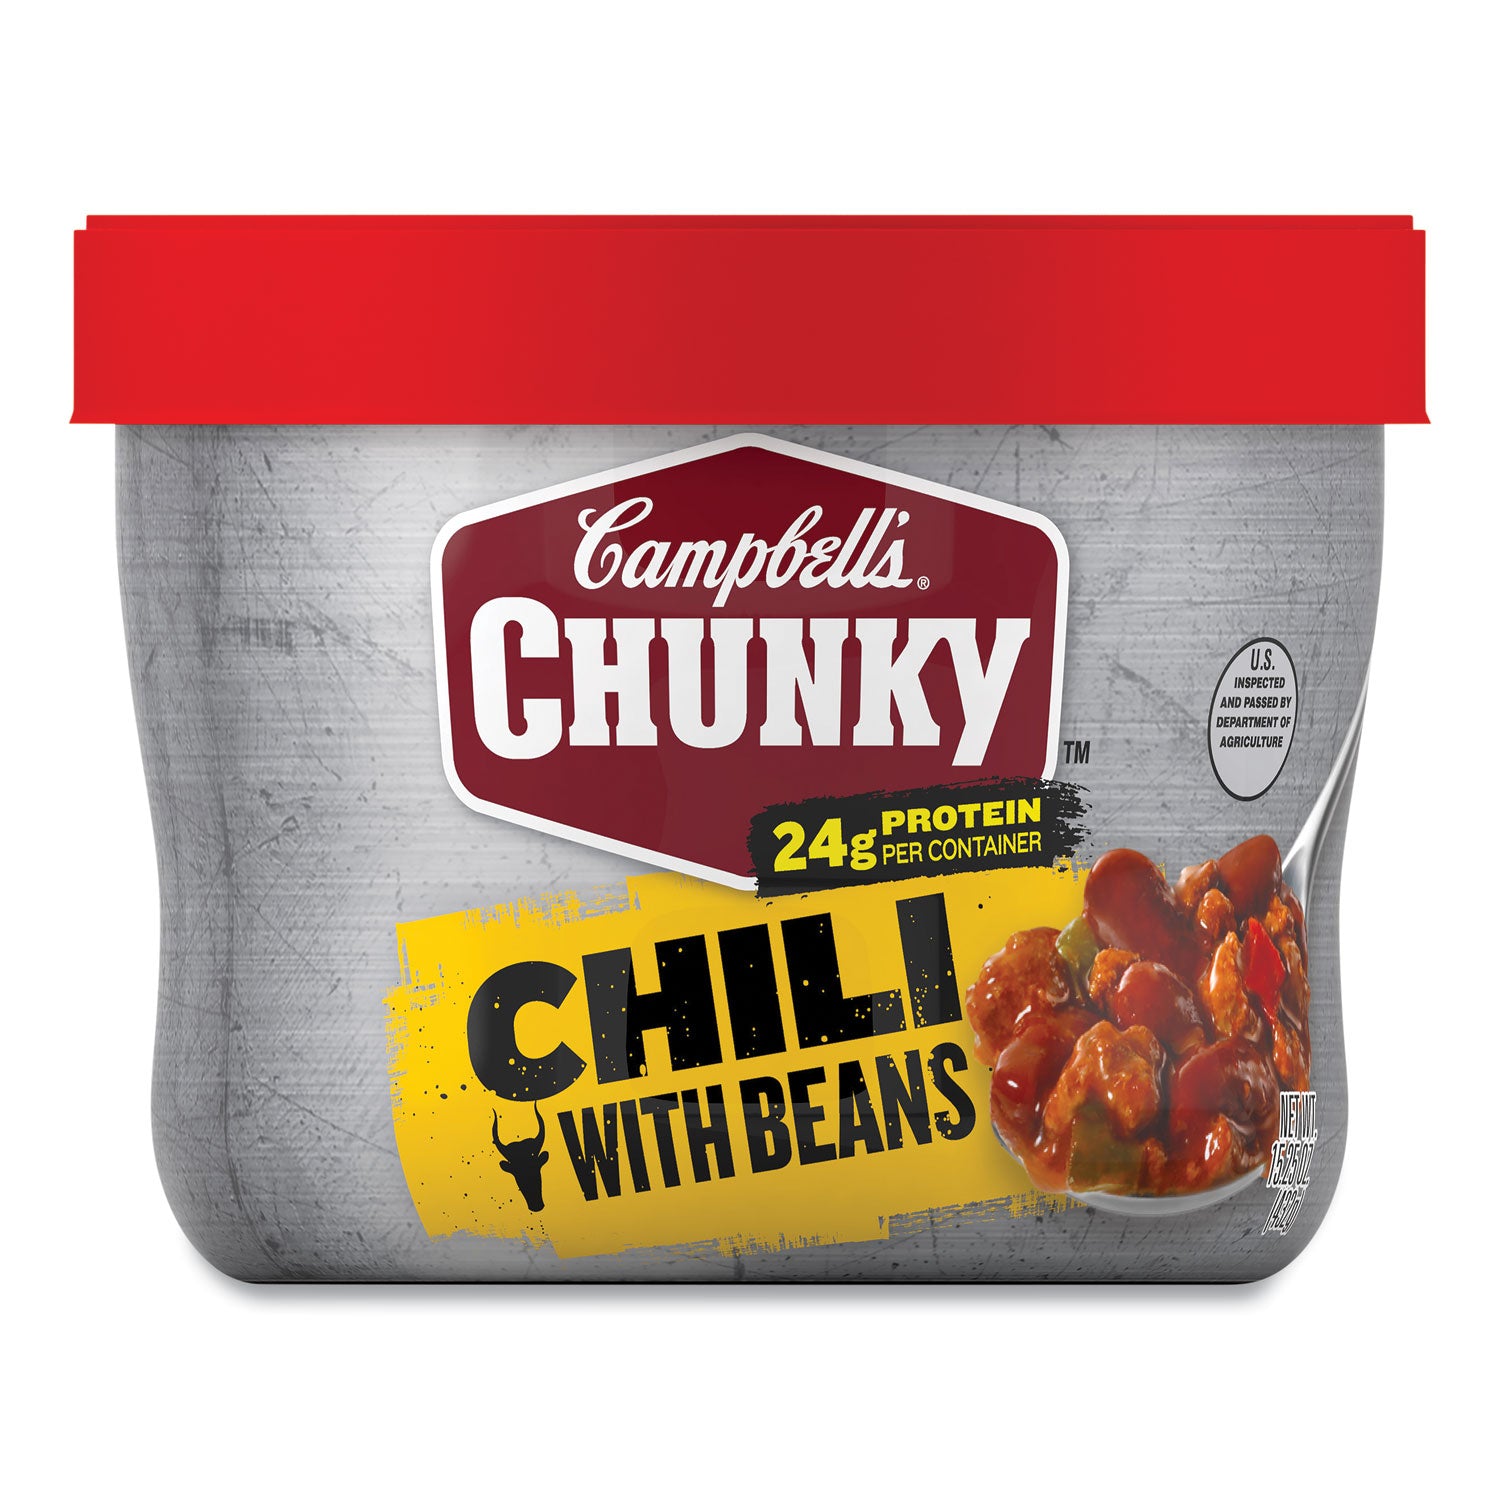 chunky-chili-with-beans-1525-oz-bowl-8-carton-ships-in-1-3-business-days_grr35100009 - 1